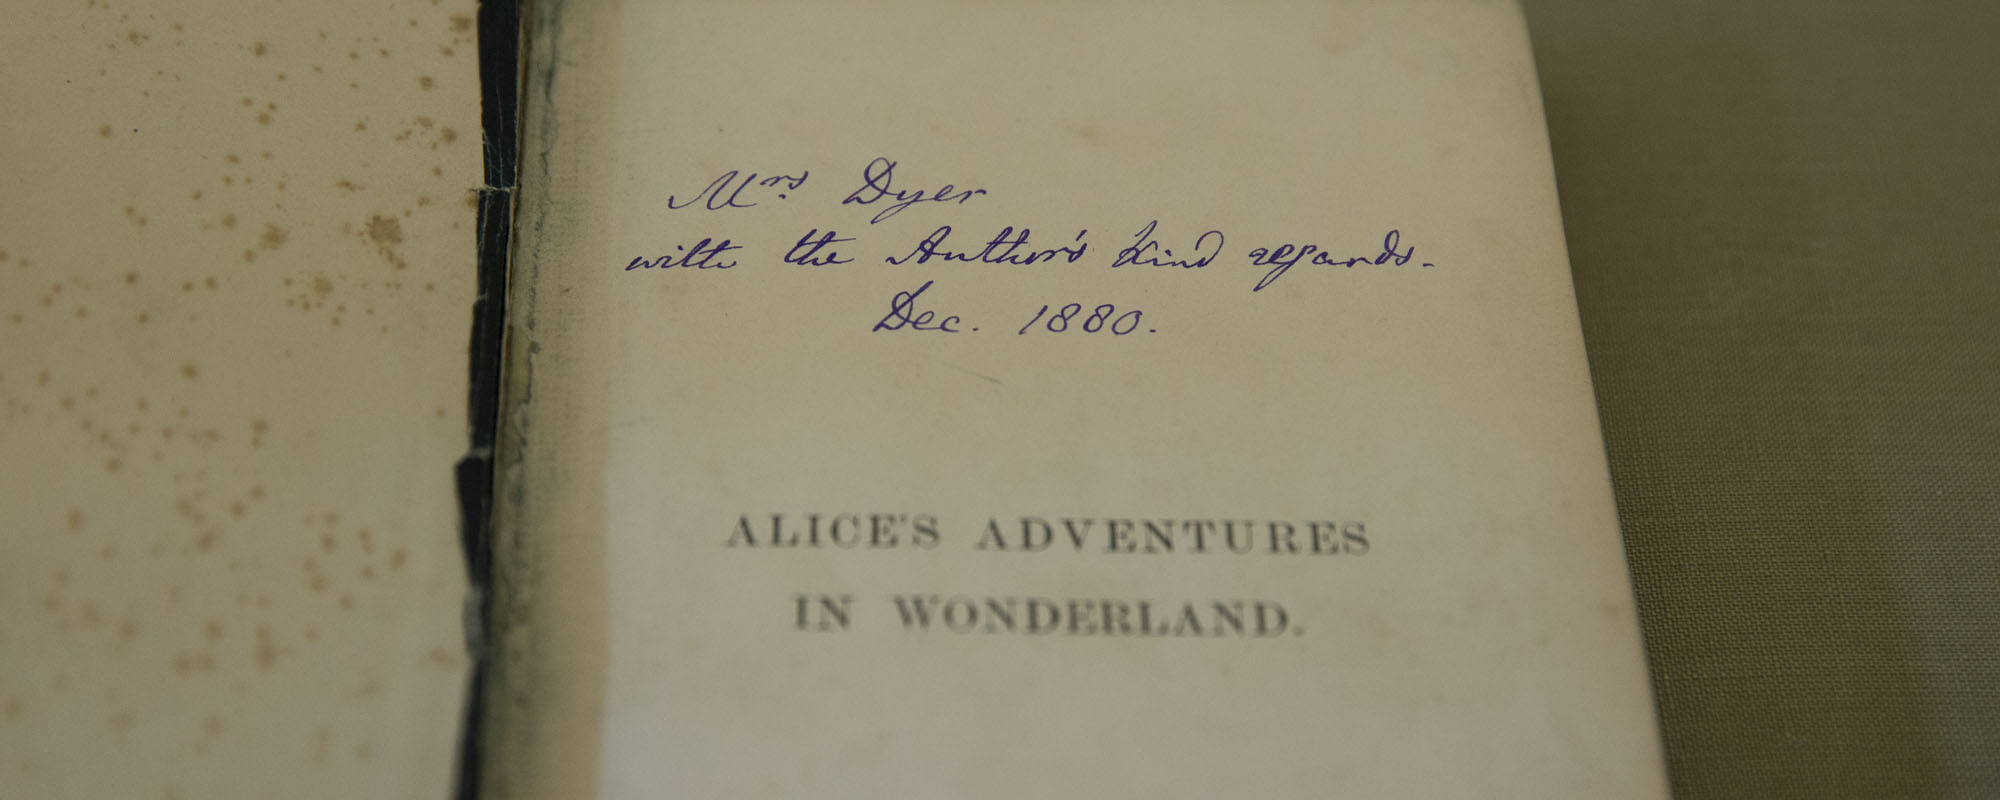 Charles Dodgson, aka Lewis Carroll, signed the copy he gave his landlady in 1880 “with the Author’s kind regards.” It seems he regularly inscribed his books from the “author” rather than choose between his penname and real name, student curator Susan Swic